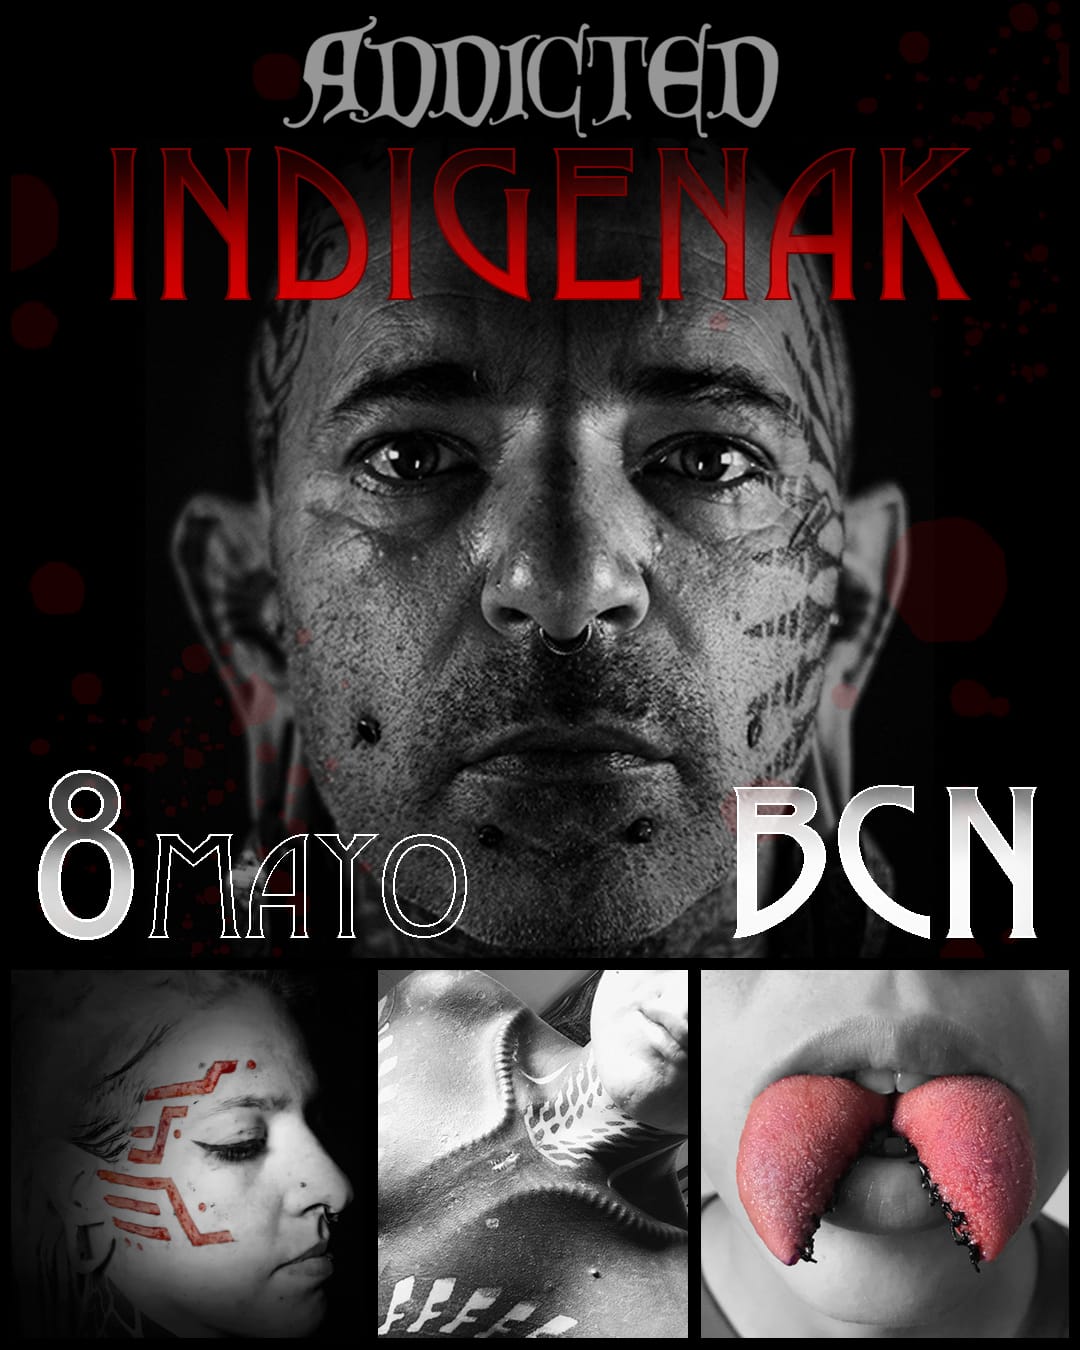 @indigenak will be with us at Addicted on May 8th!